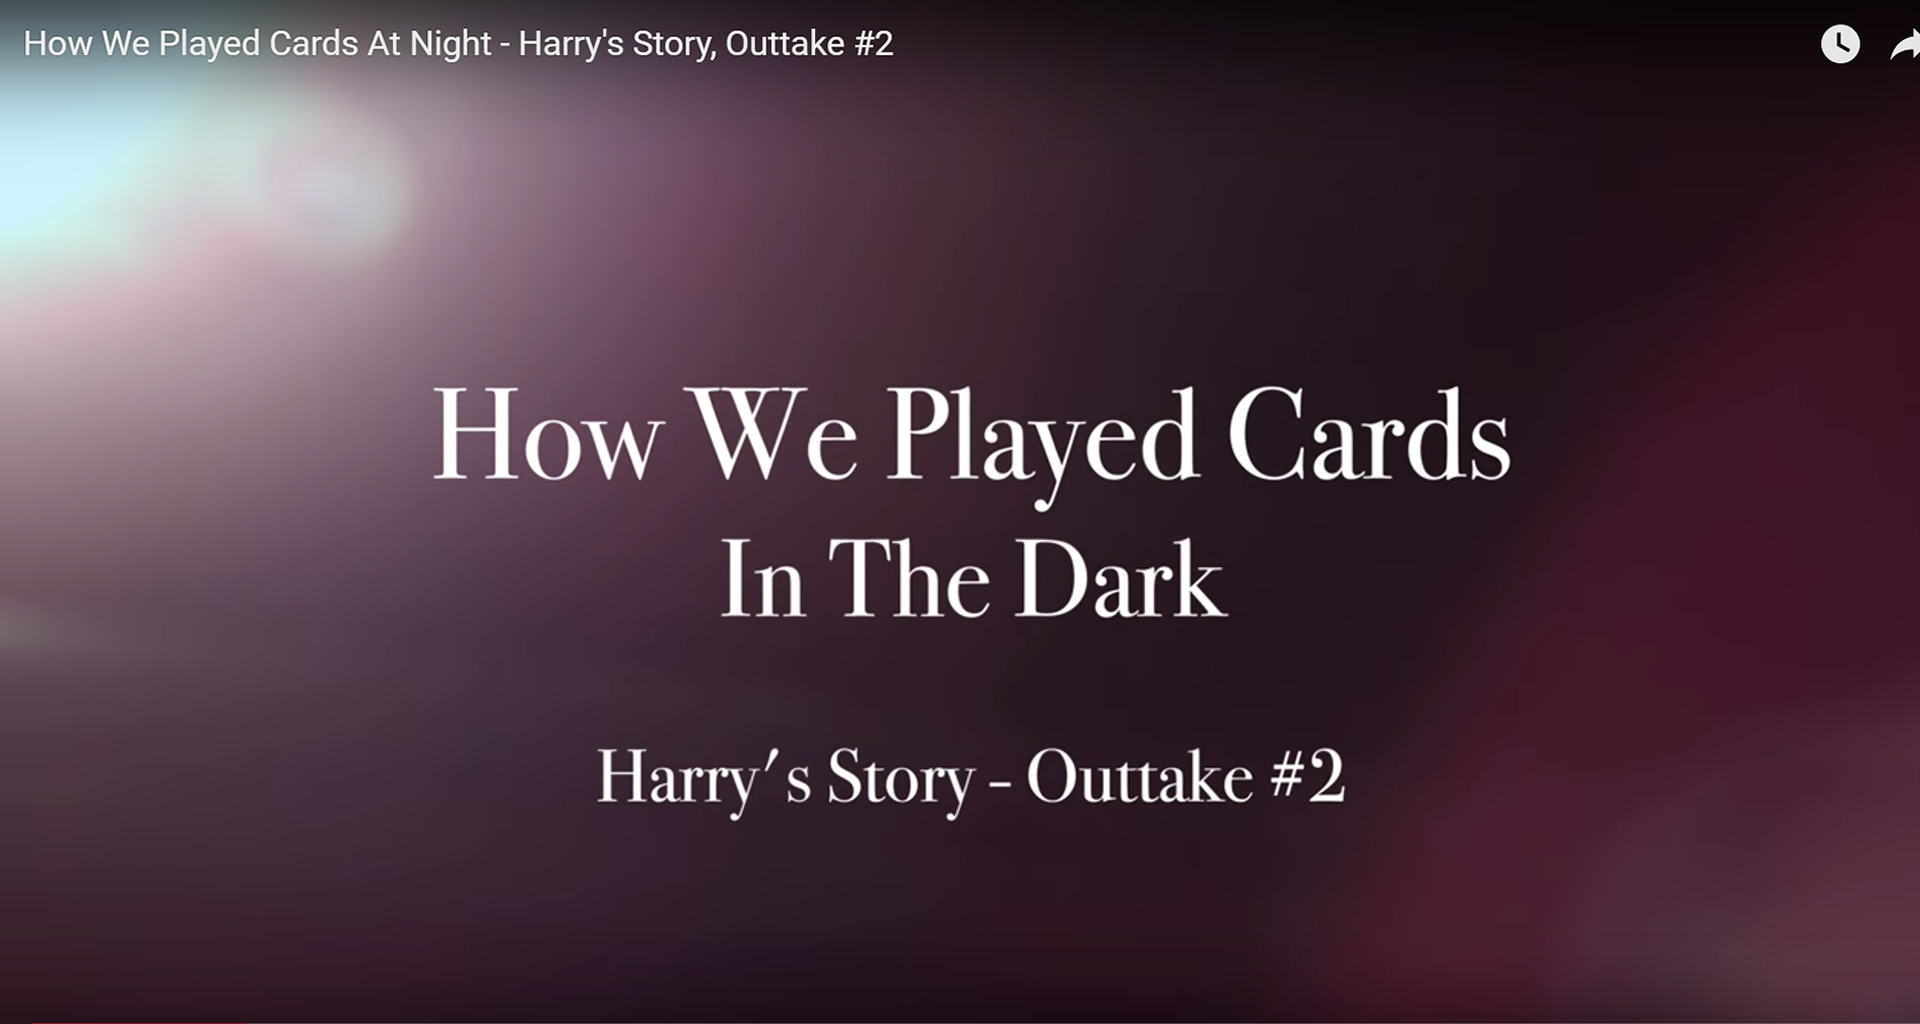 Harry's Story Outtake #2